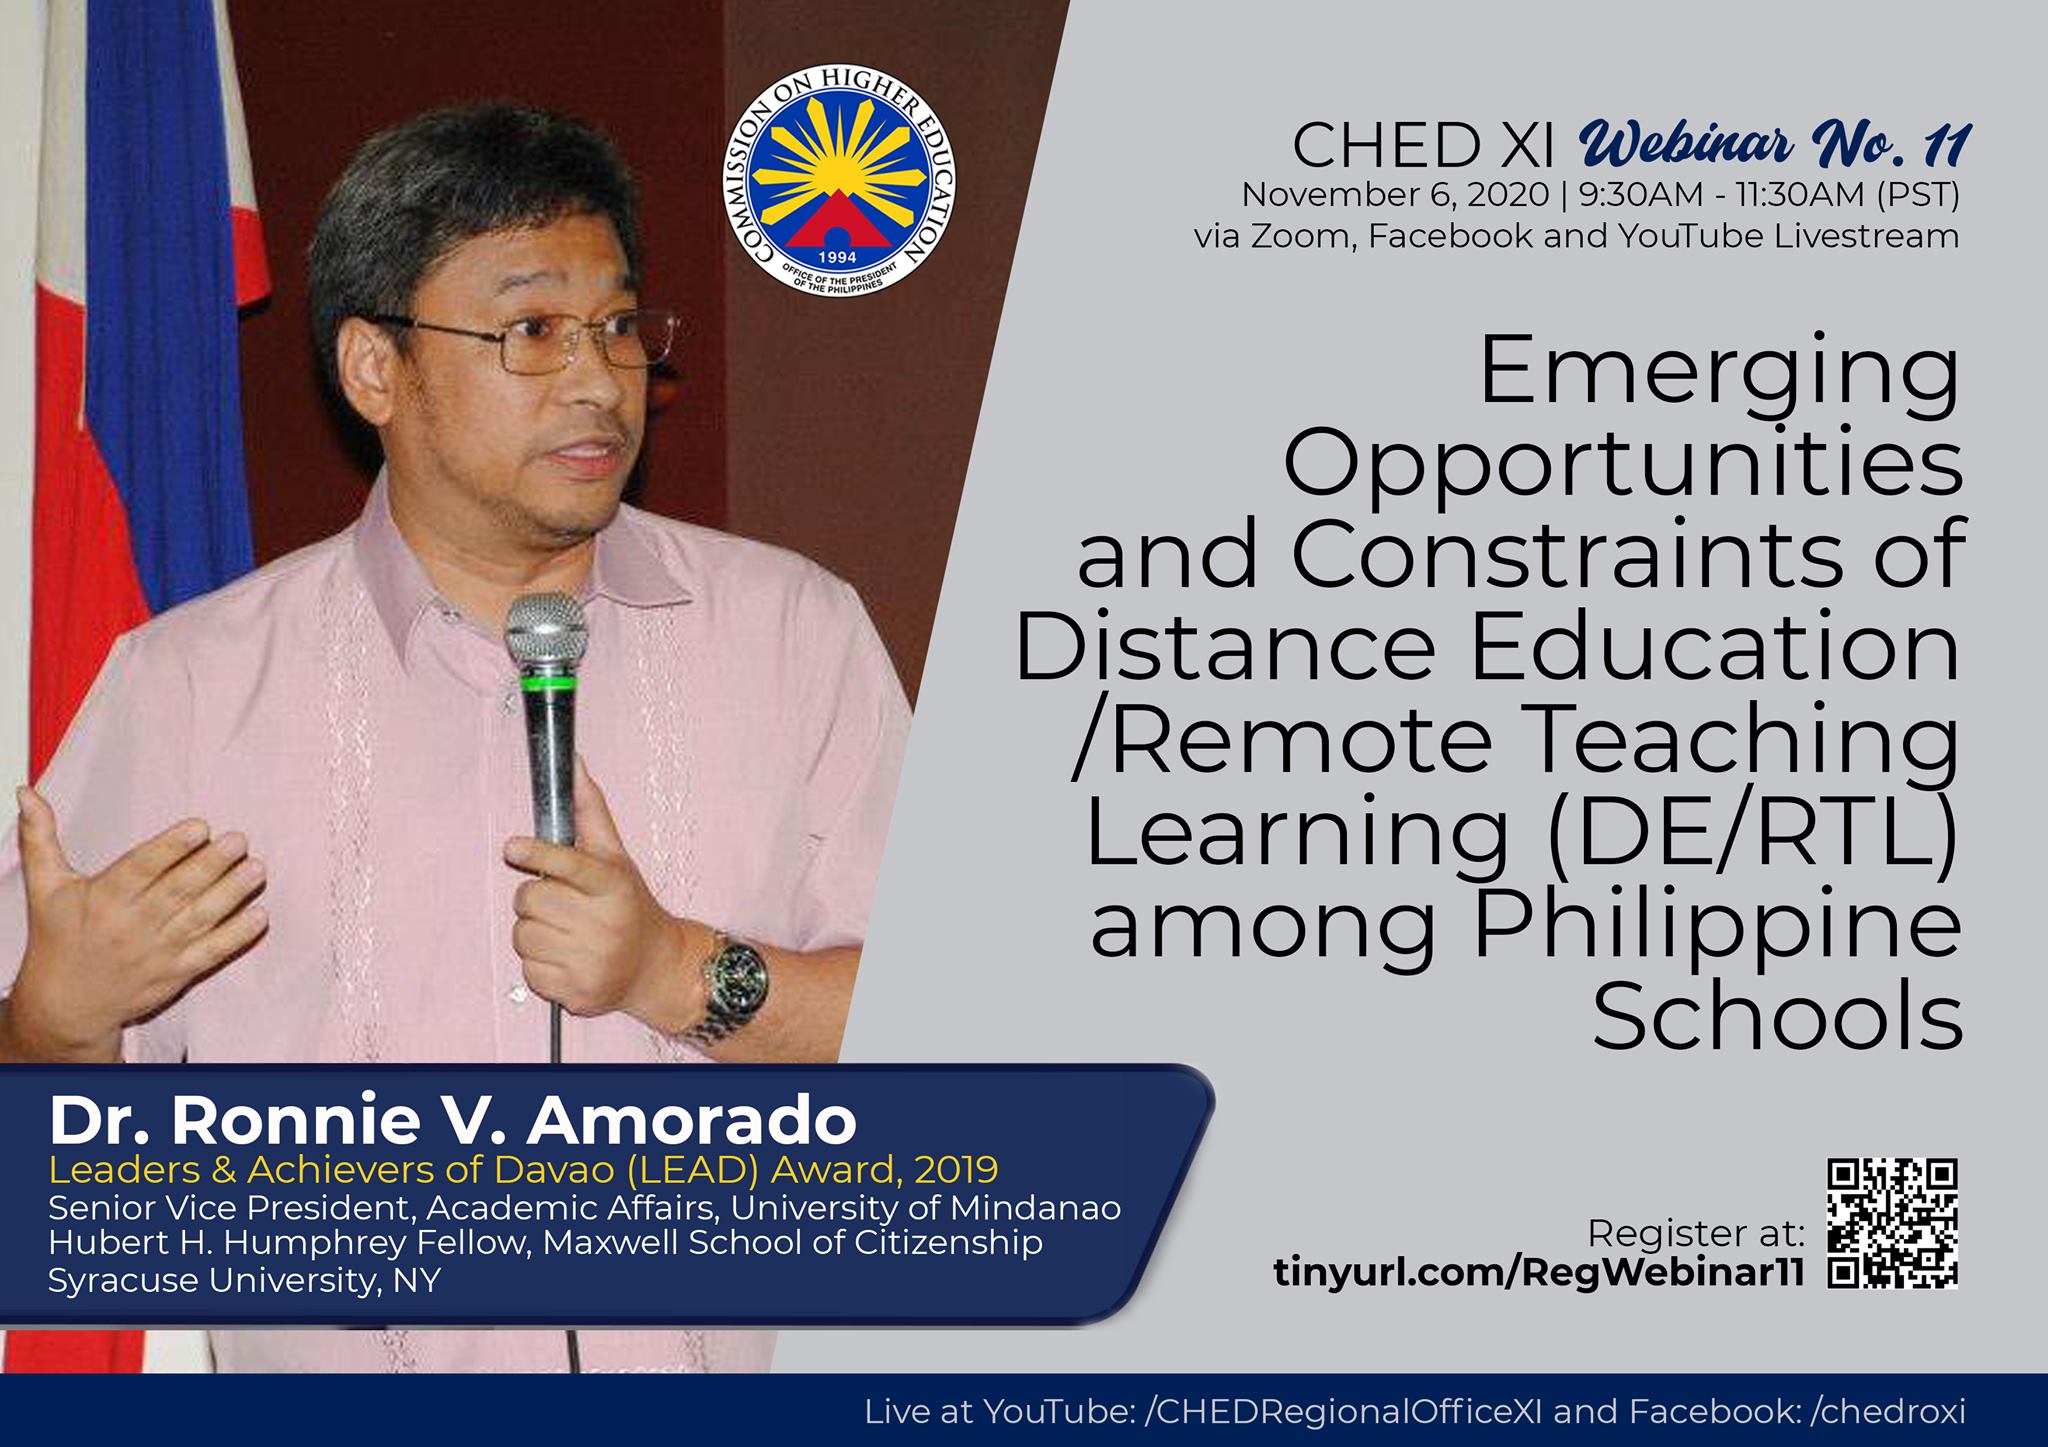 An Invitation : A Webinar on Emerging Opportunities and Constraints of Distance Education/Remote Teaching Learning (DE/RTL) among Philippine Schools